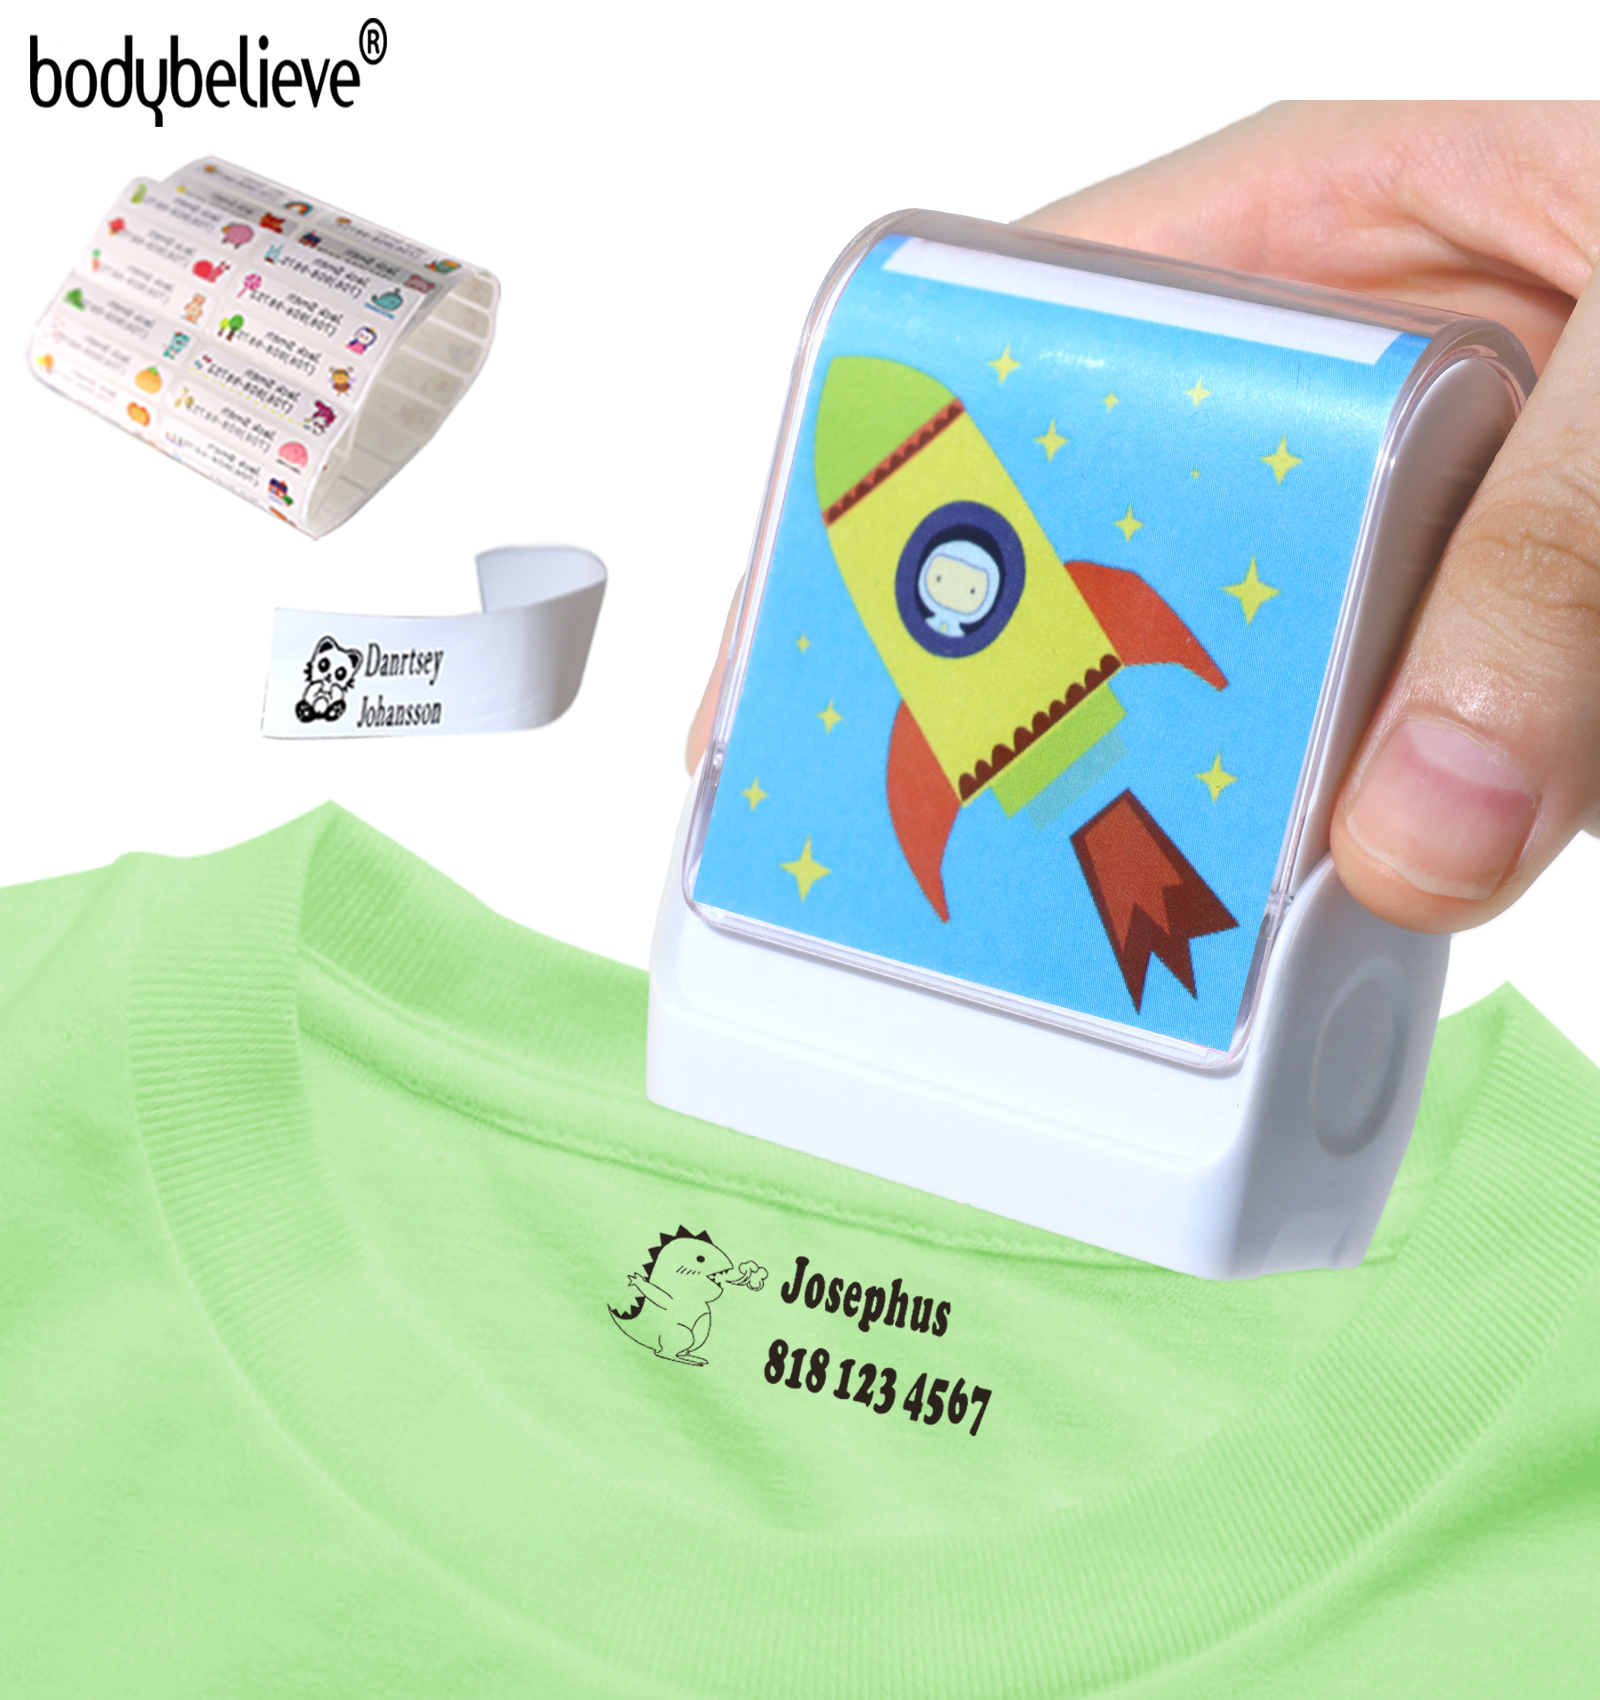 Personalized Name Stamp for Clothing Kids Custom Clothes Stamp